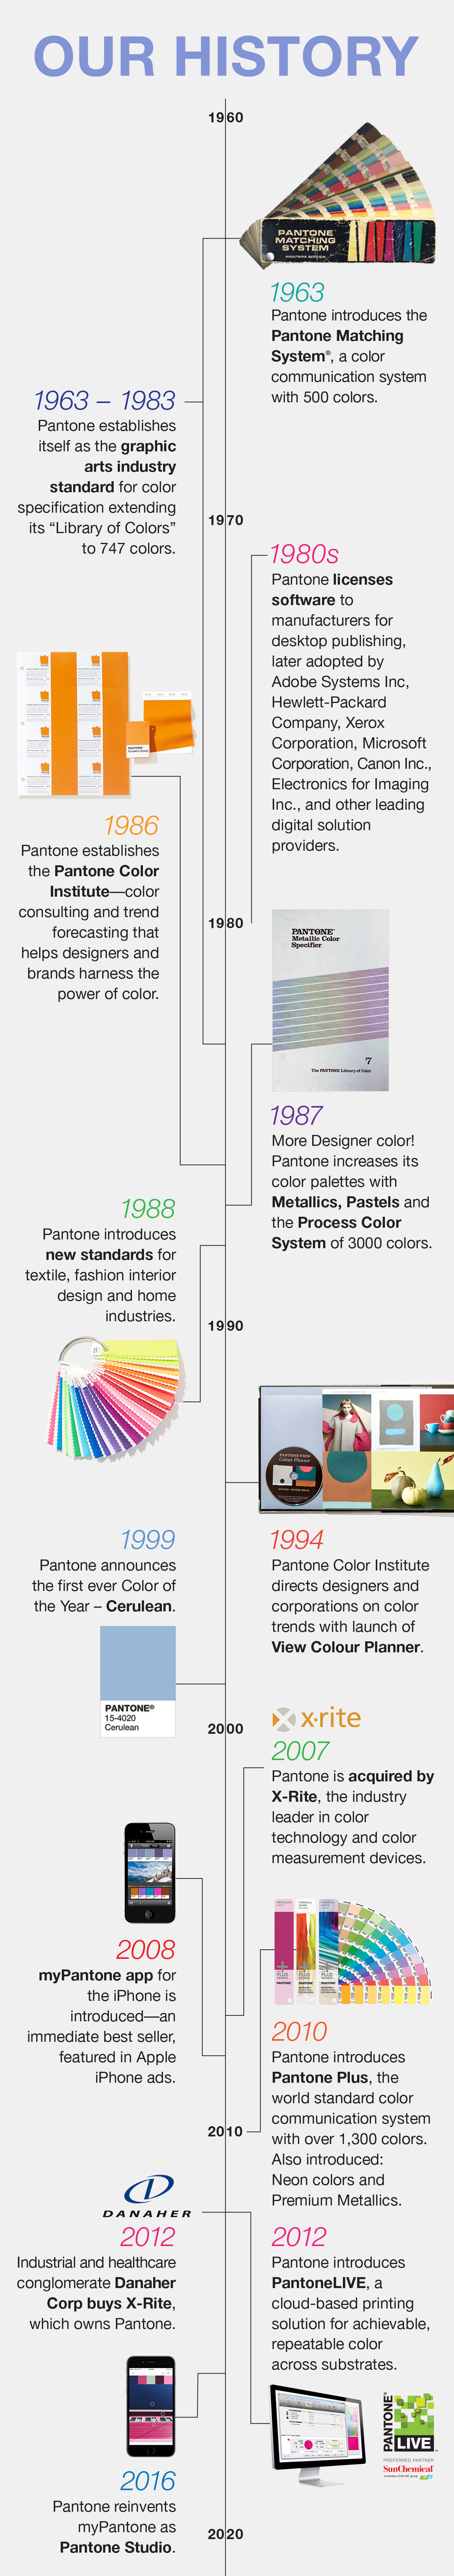 The History of Pantone Timeline